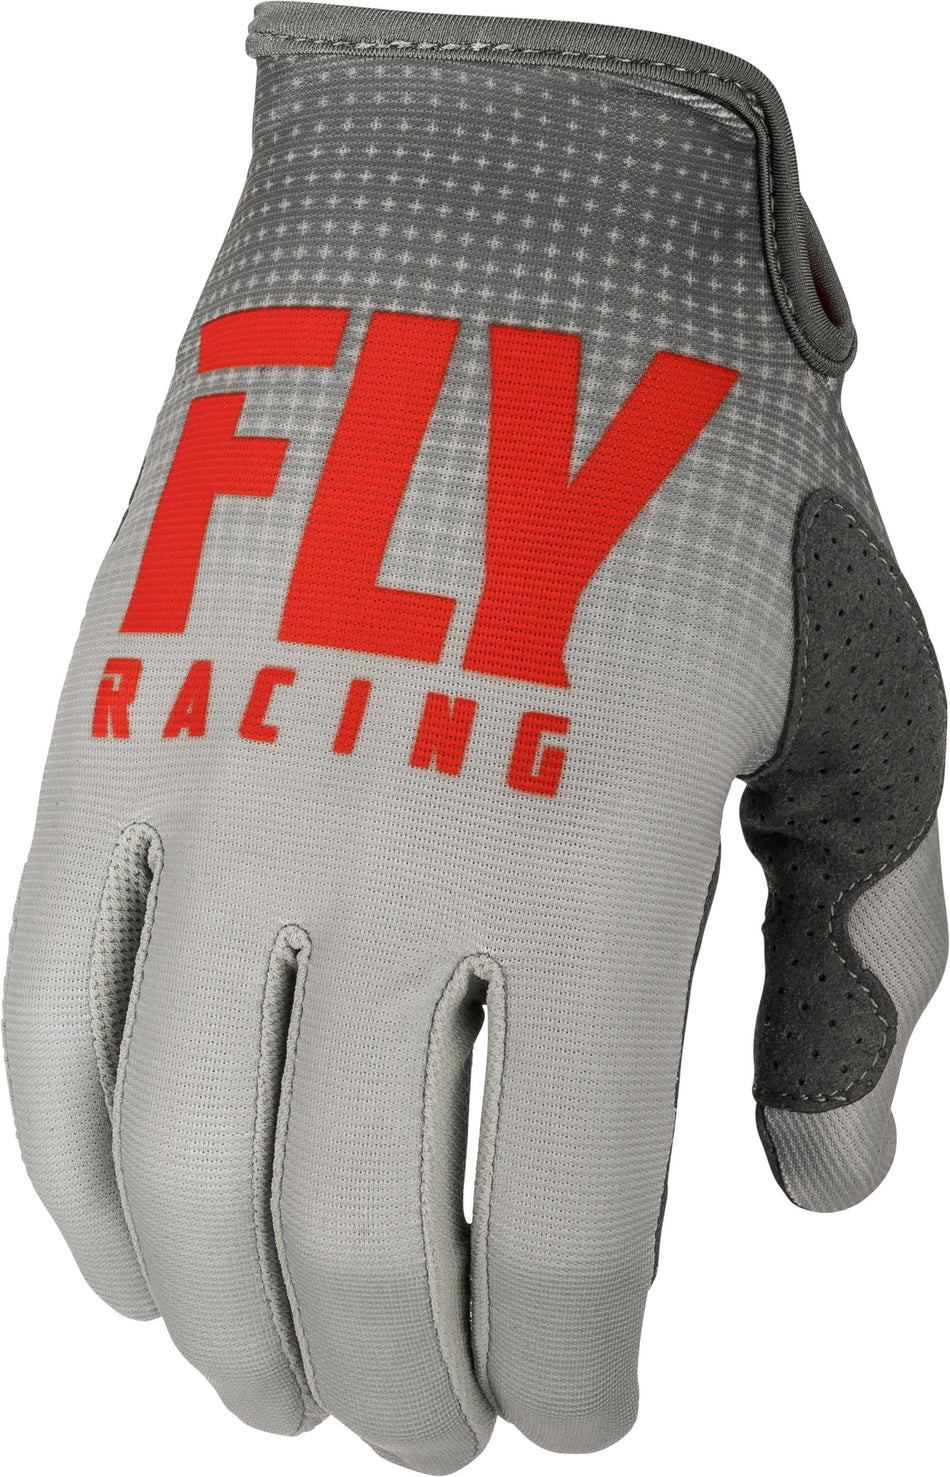 FLY RACING Lite Gloves Red/Grey Sz 06 372-01206